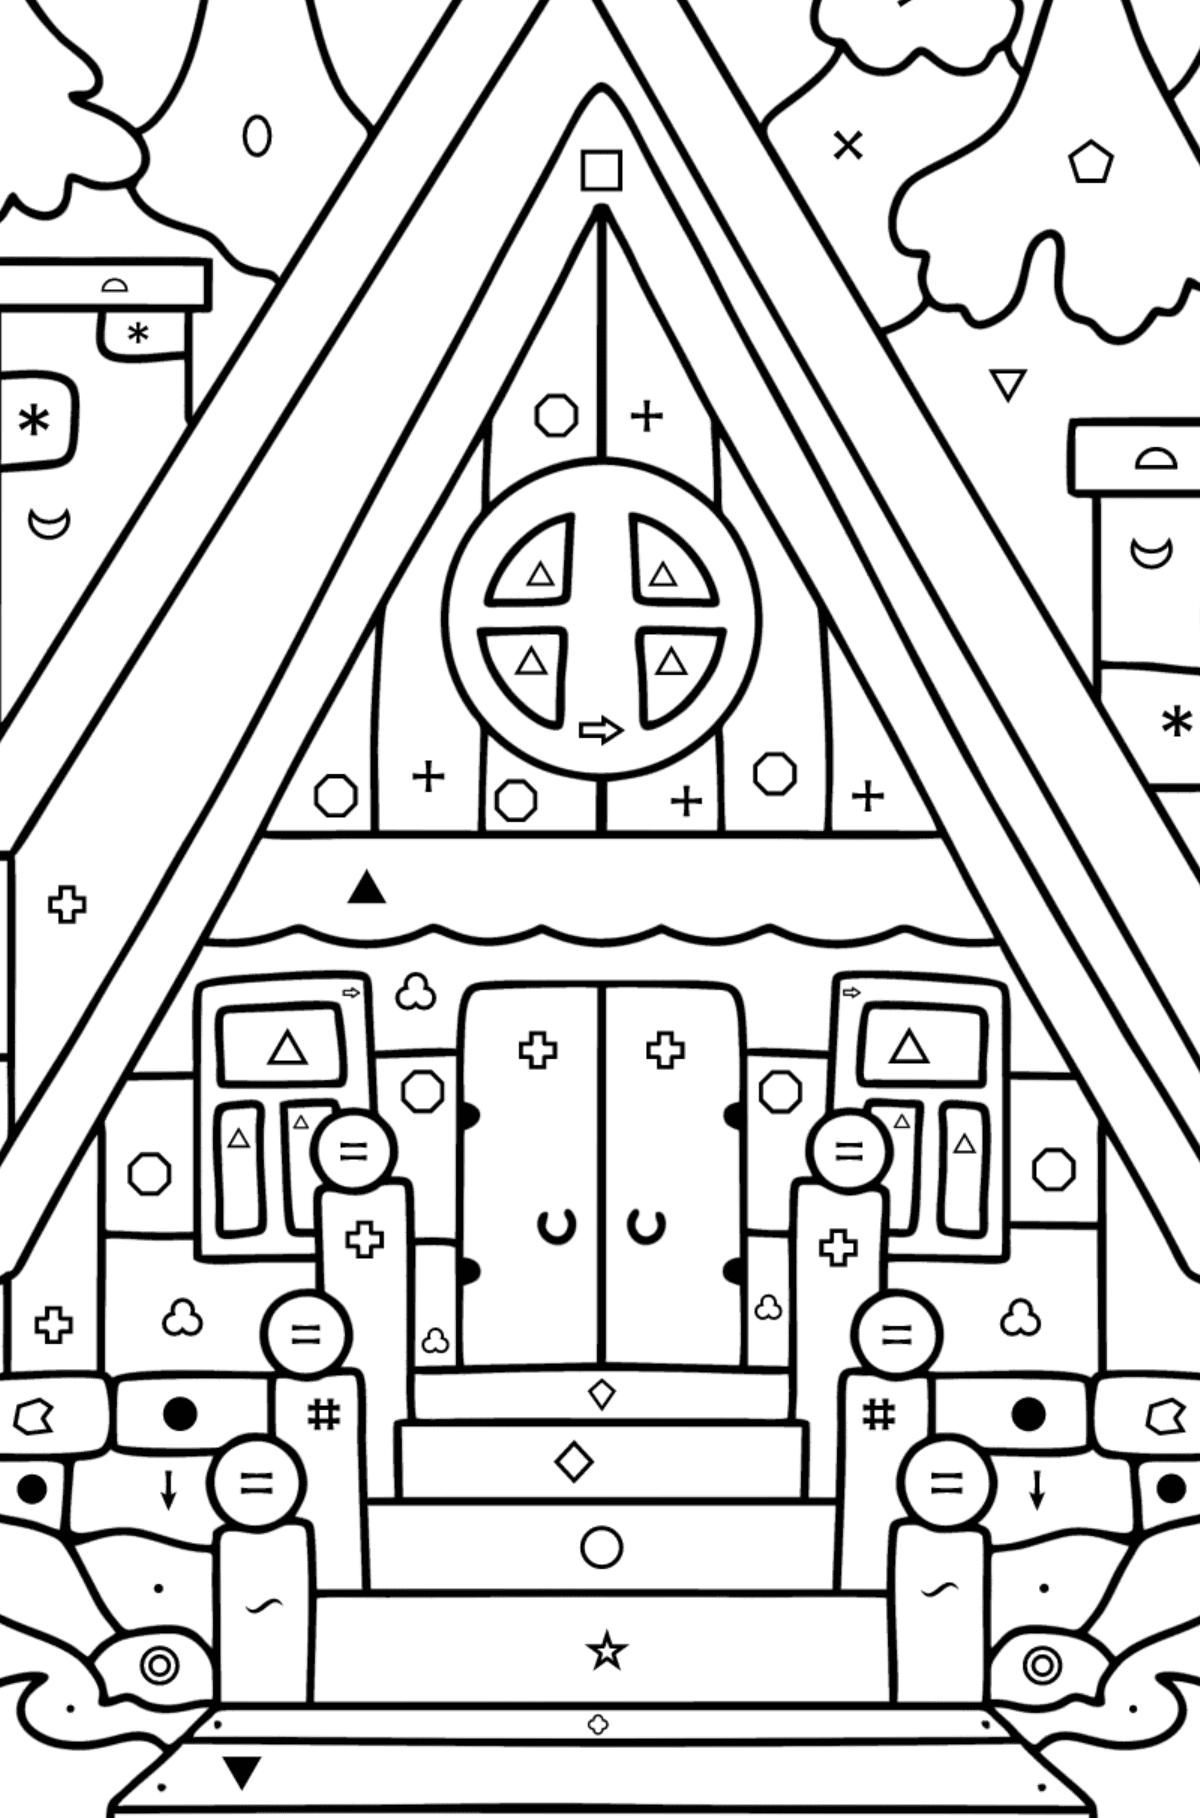 Country House Near The River coloring page - Coloring by Symbols and Geometric Shapes for Kids